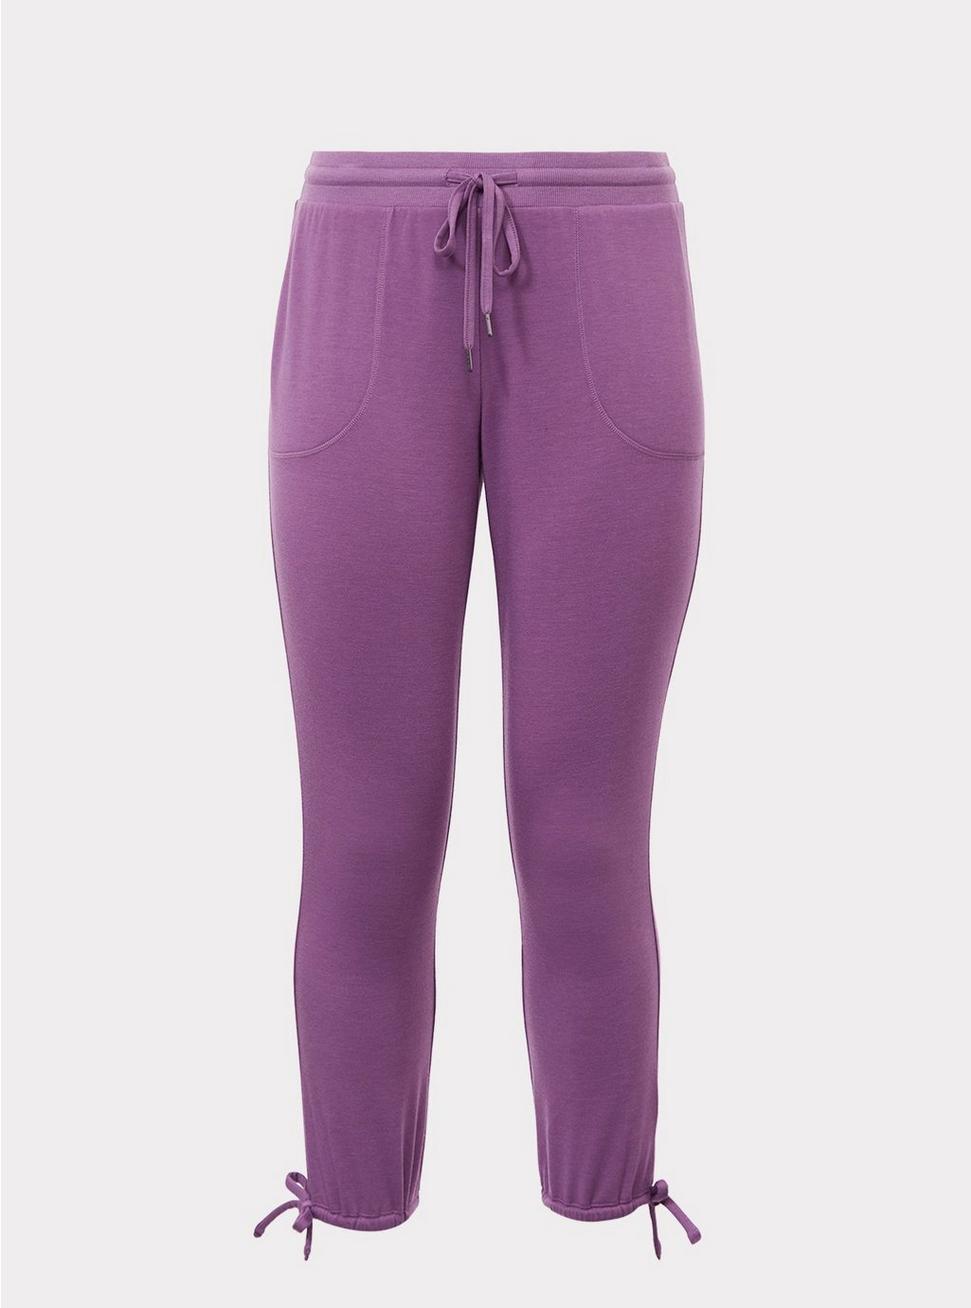 Plus Size - Purple French Terry Jogger Pant - Torrid